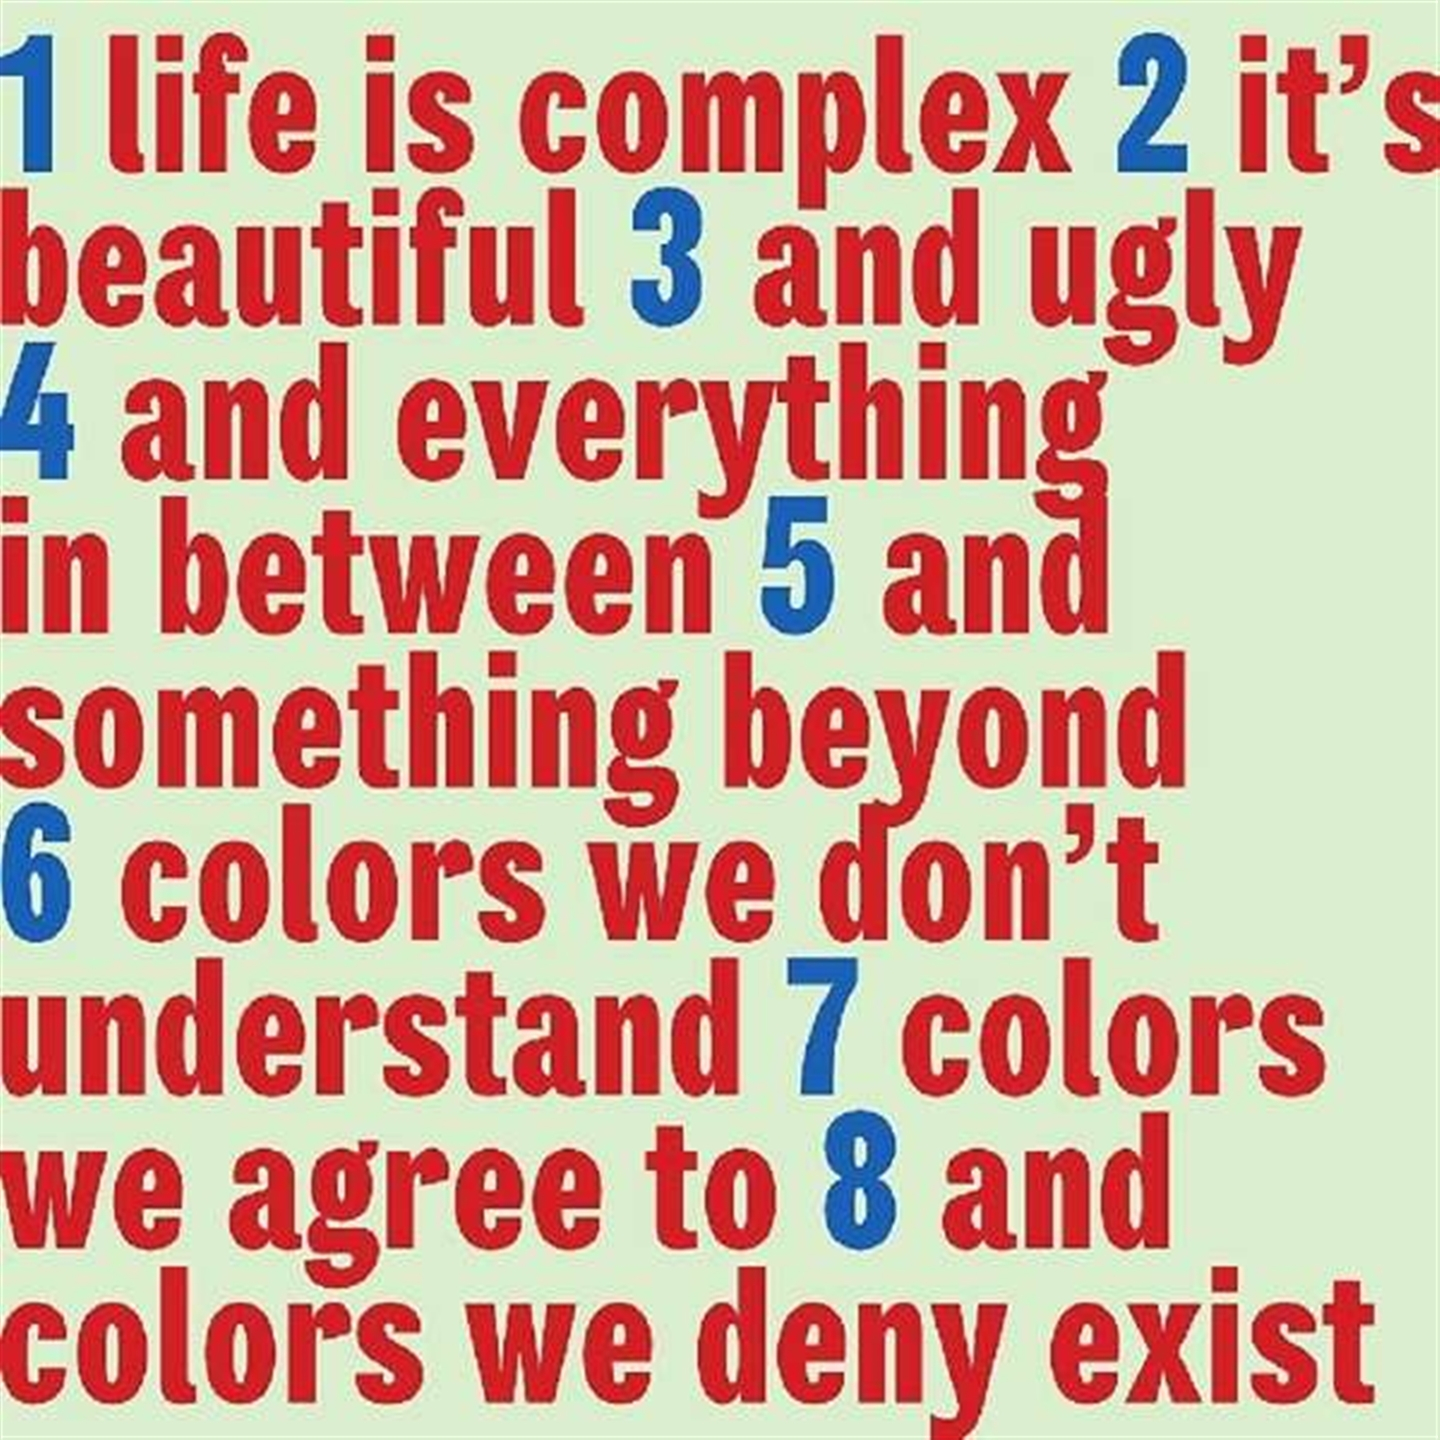 LIFE IS COMPLEX IT'S BEAUTIFUL AND UGLY AND EVERYT